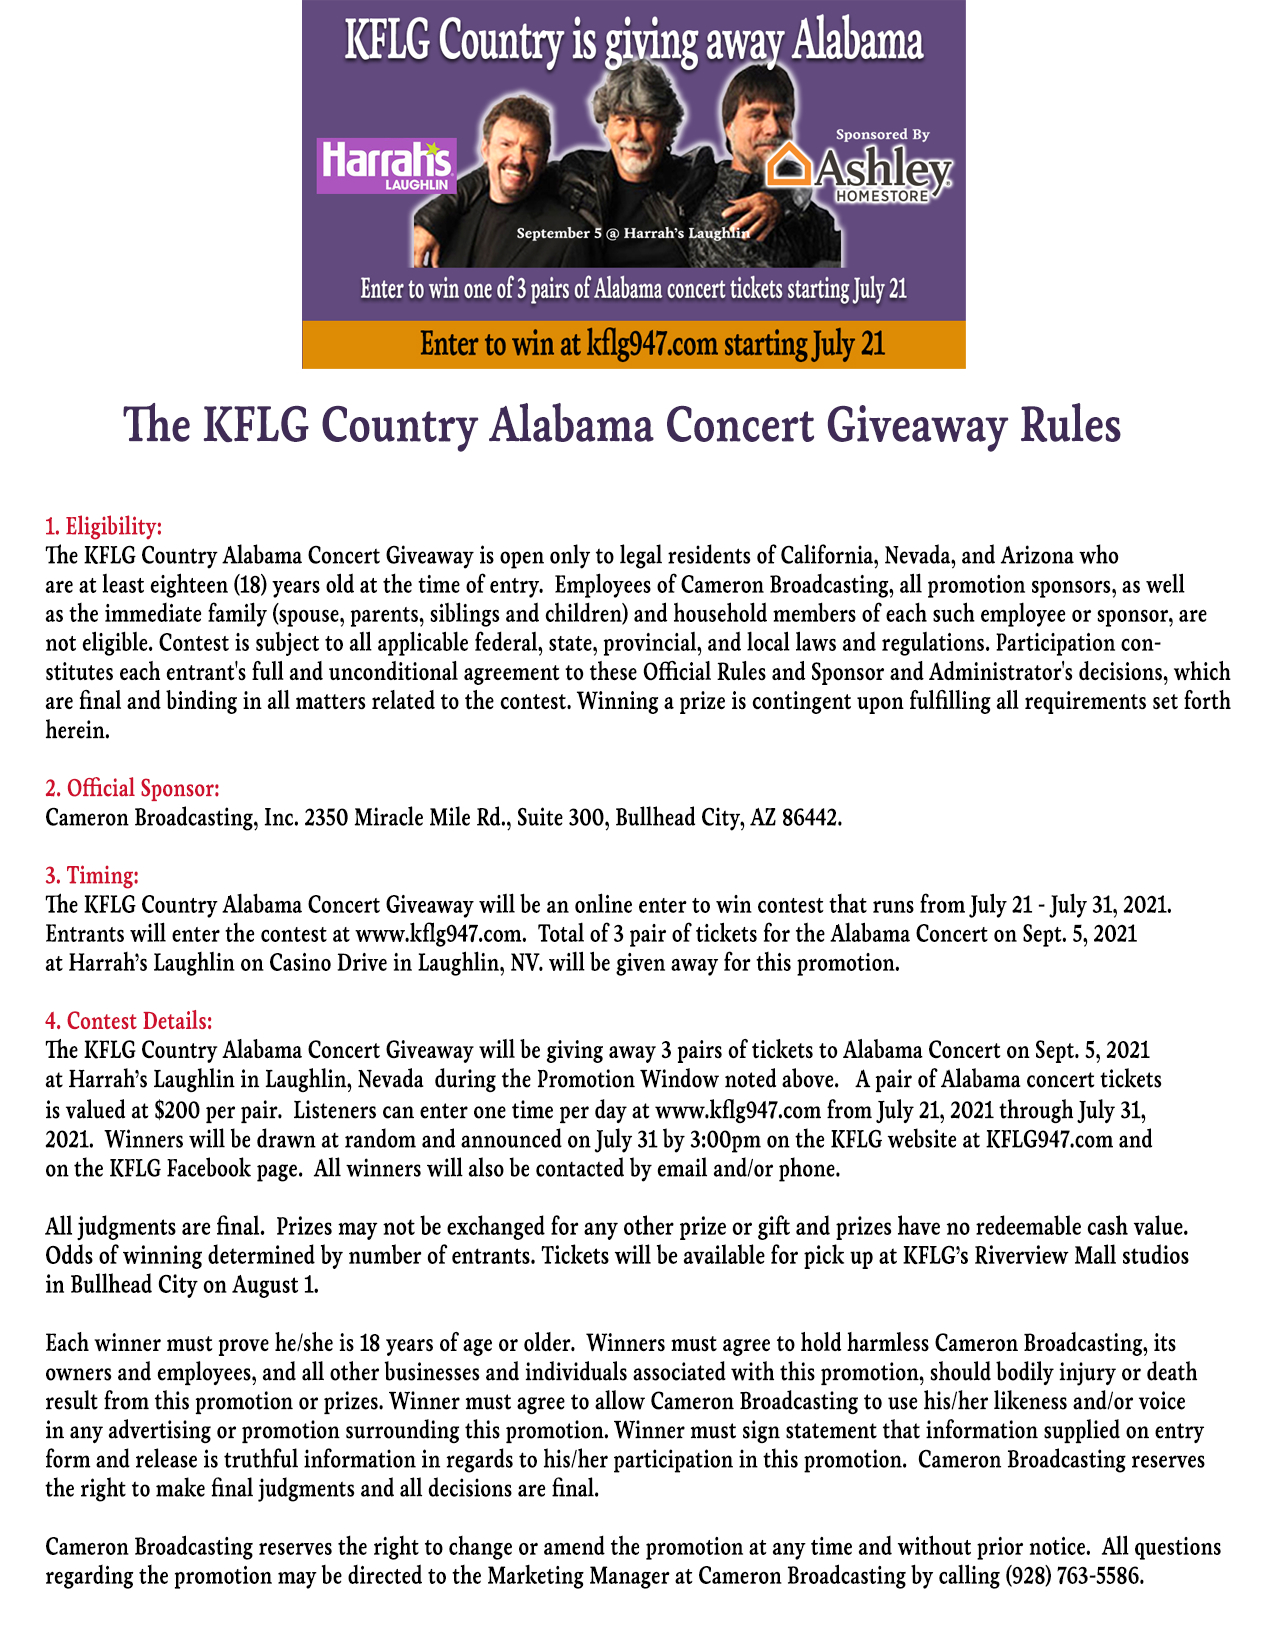 KFLG Country Alabama Concert Giveaway Rules